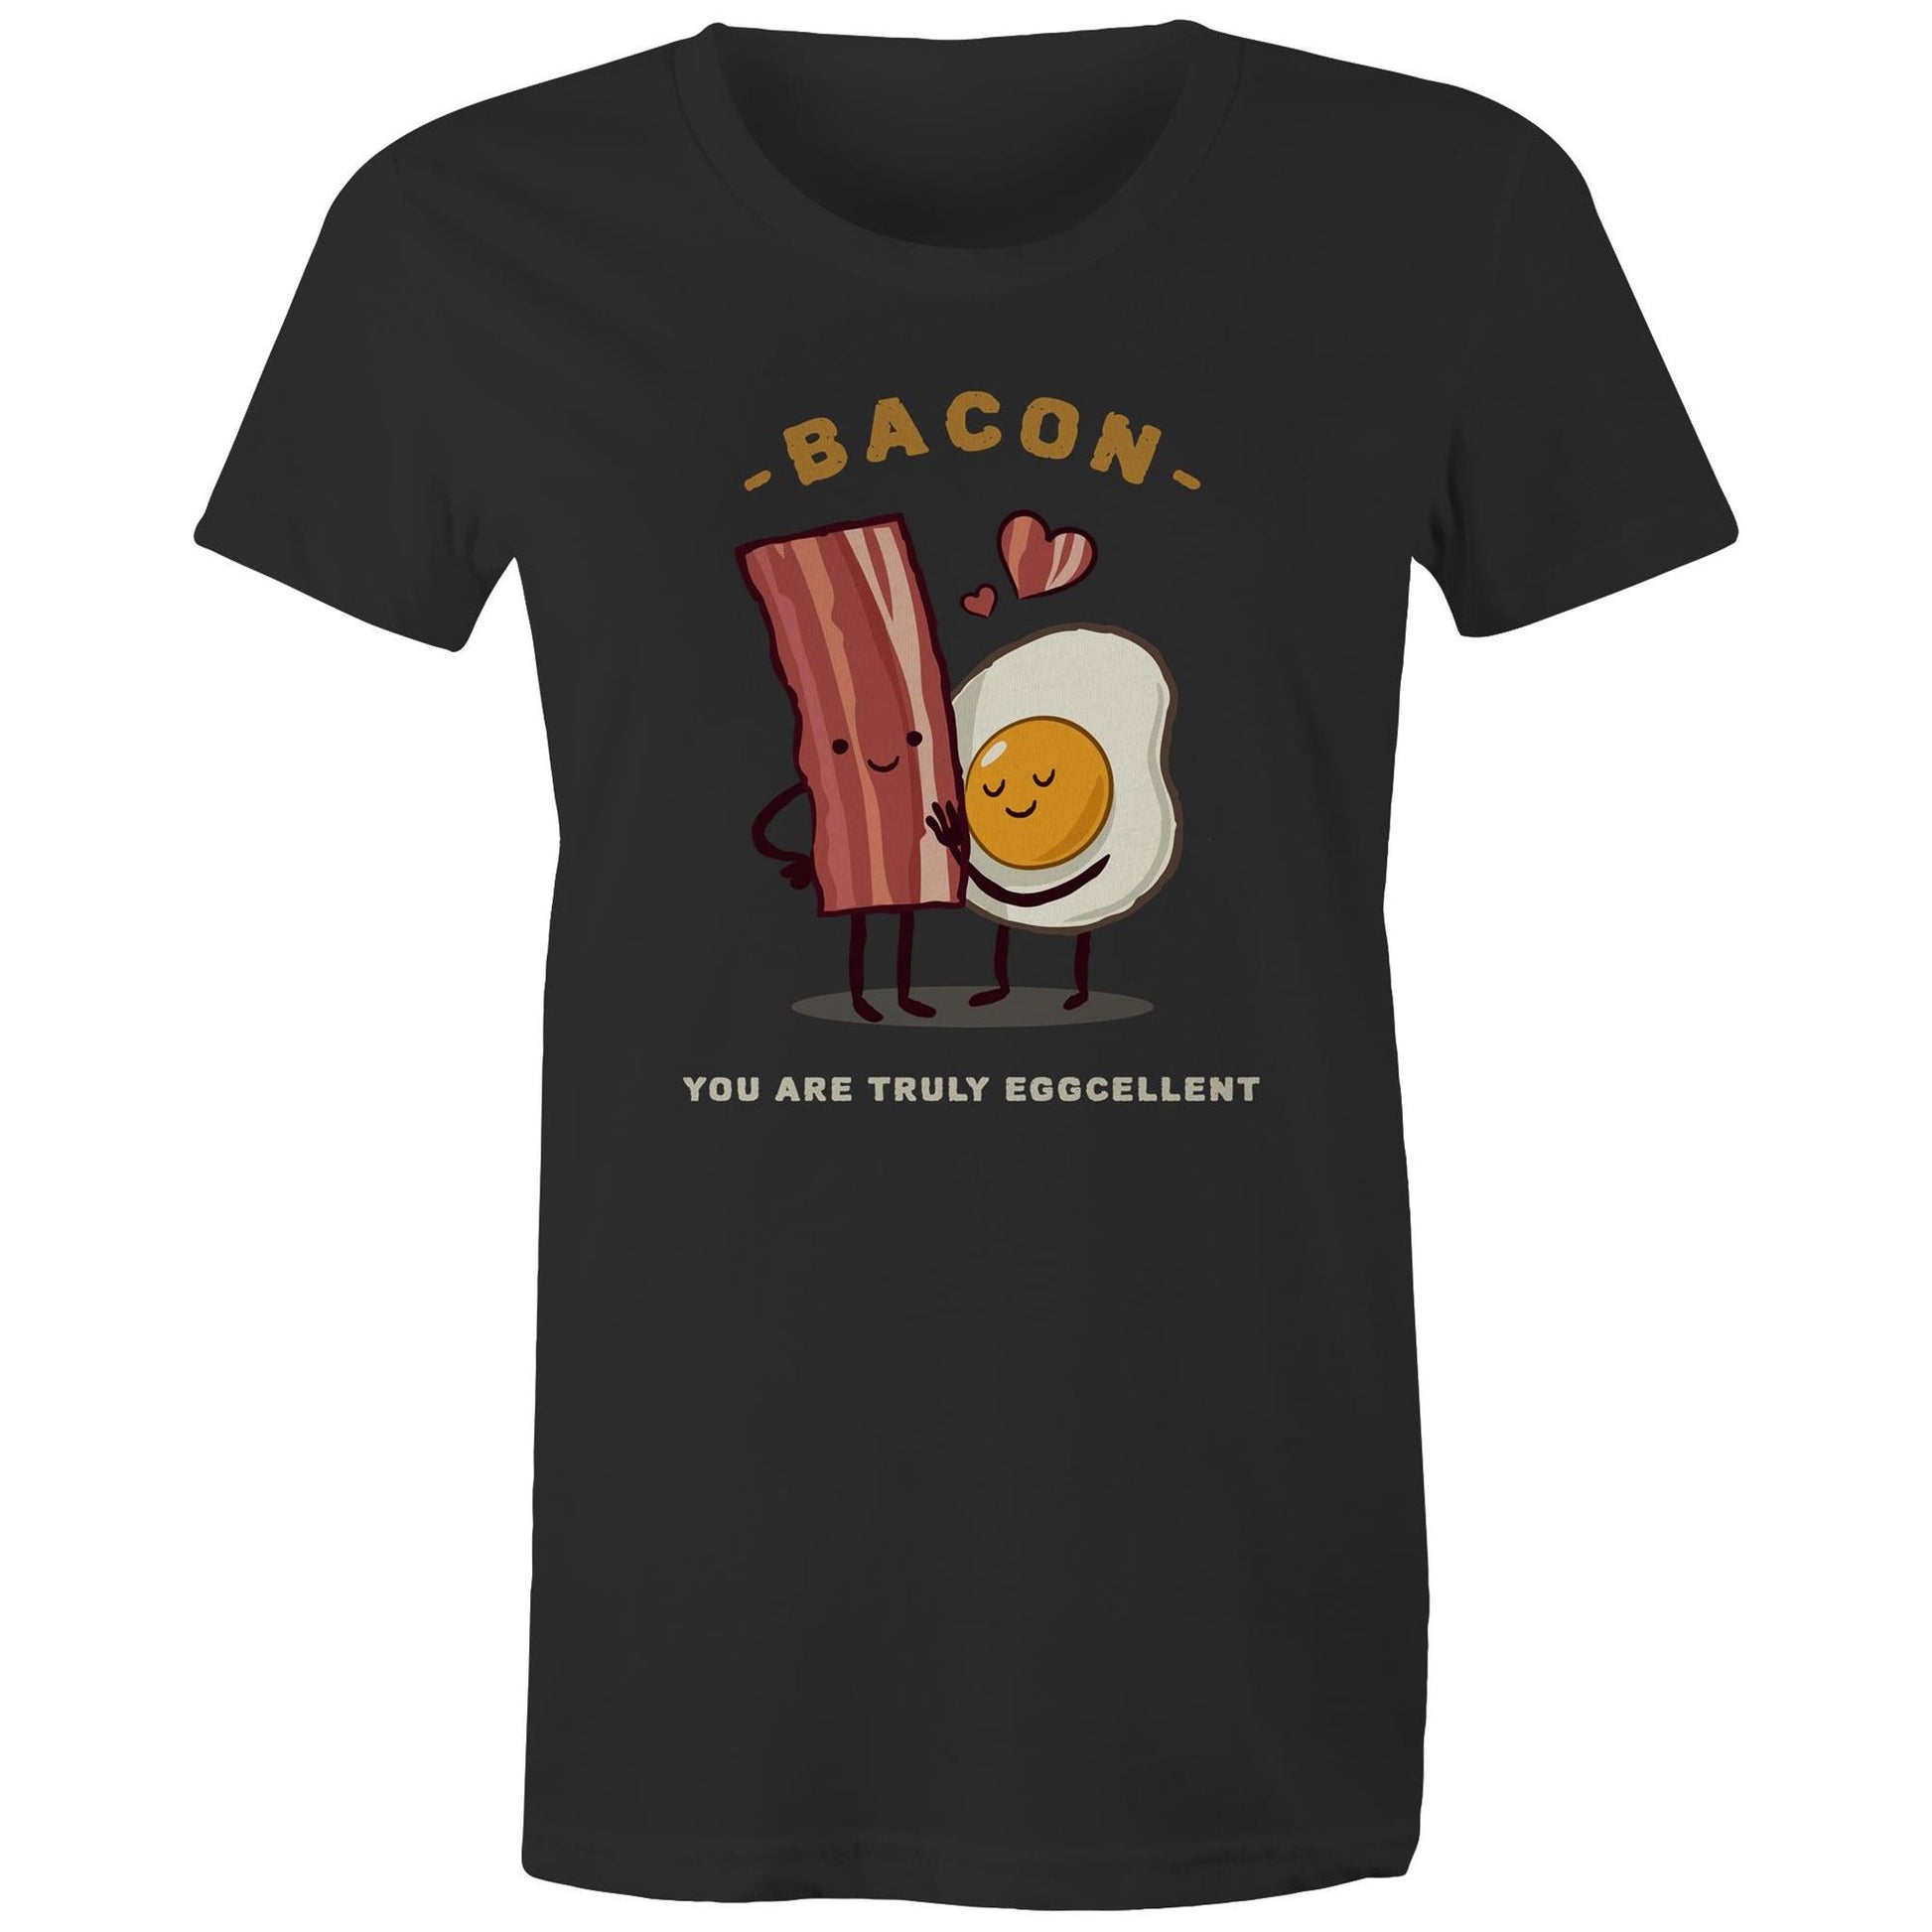 Bacon, You Are Truly Eggcellent - Womens T-shirt Black Womens T-shirt Food